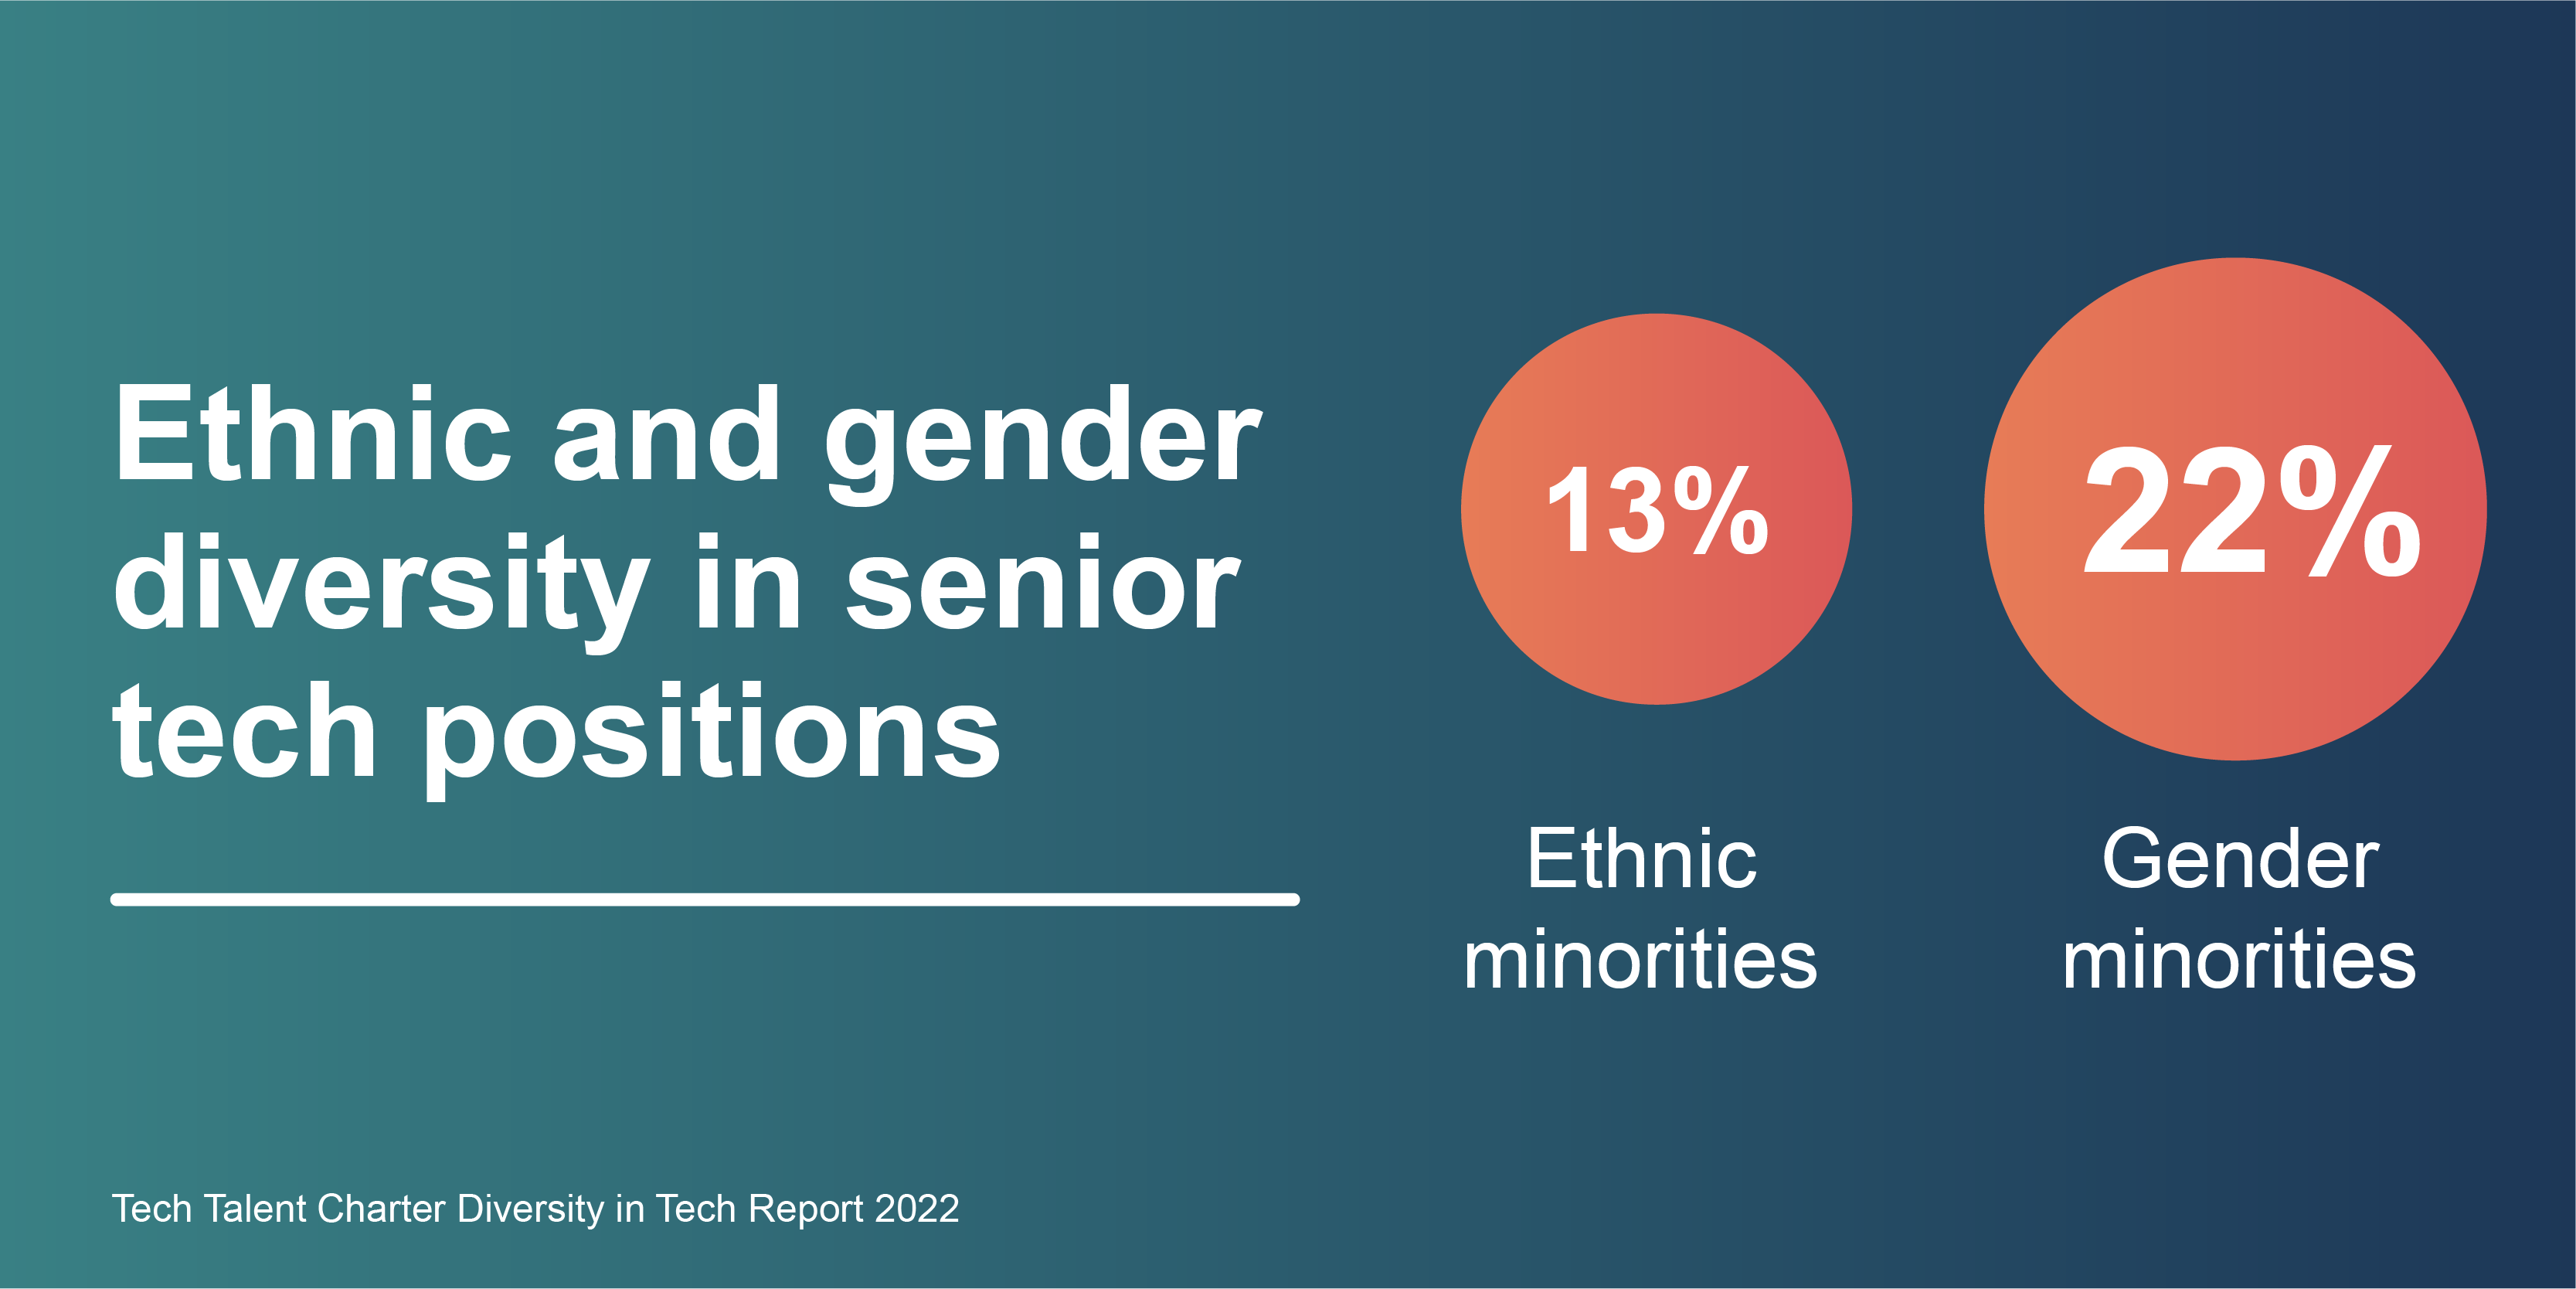 Ethnic diversity in senior tech positions is 13%, where gender diversity is 22%.